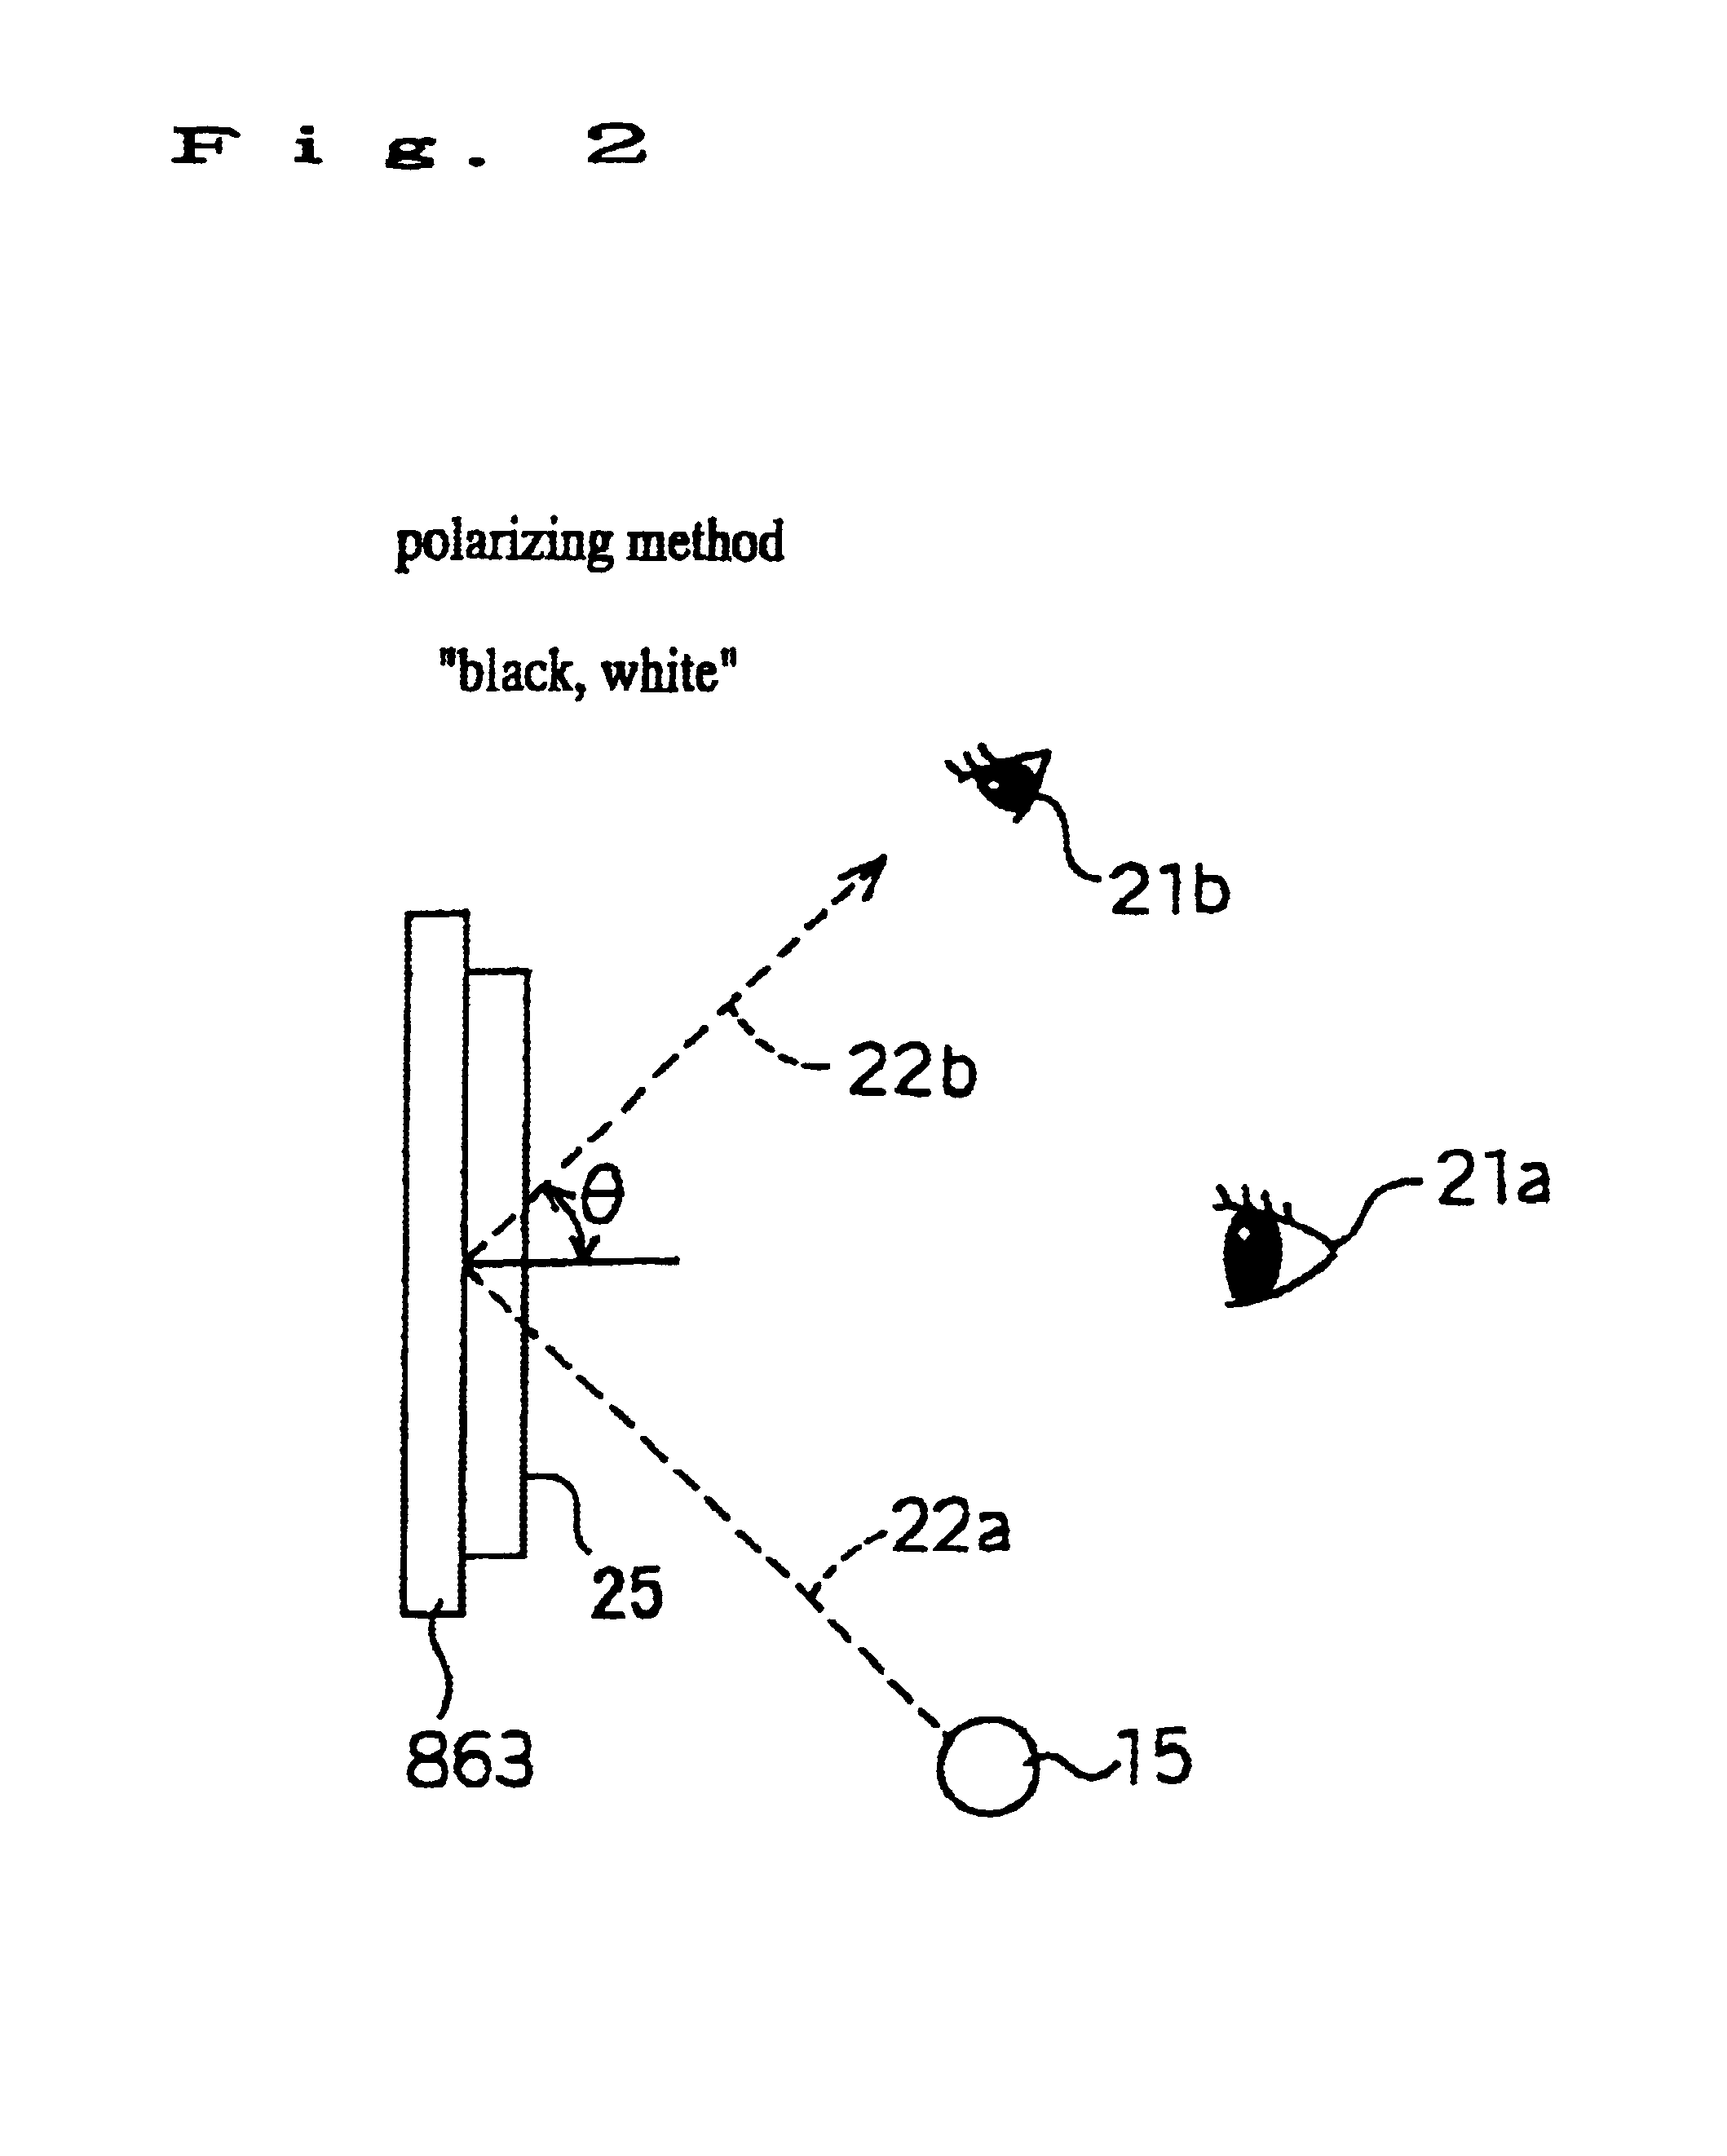 Illuminating apparatus, display panel, view finder, video display apparatus, and video camera mounting the elements